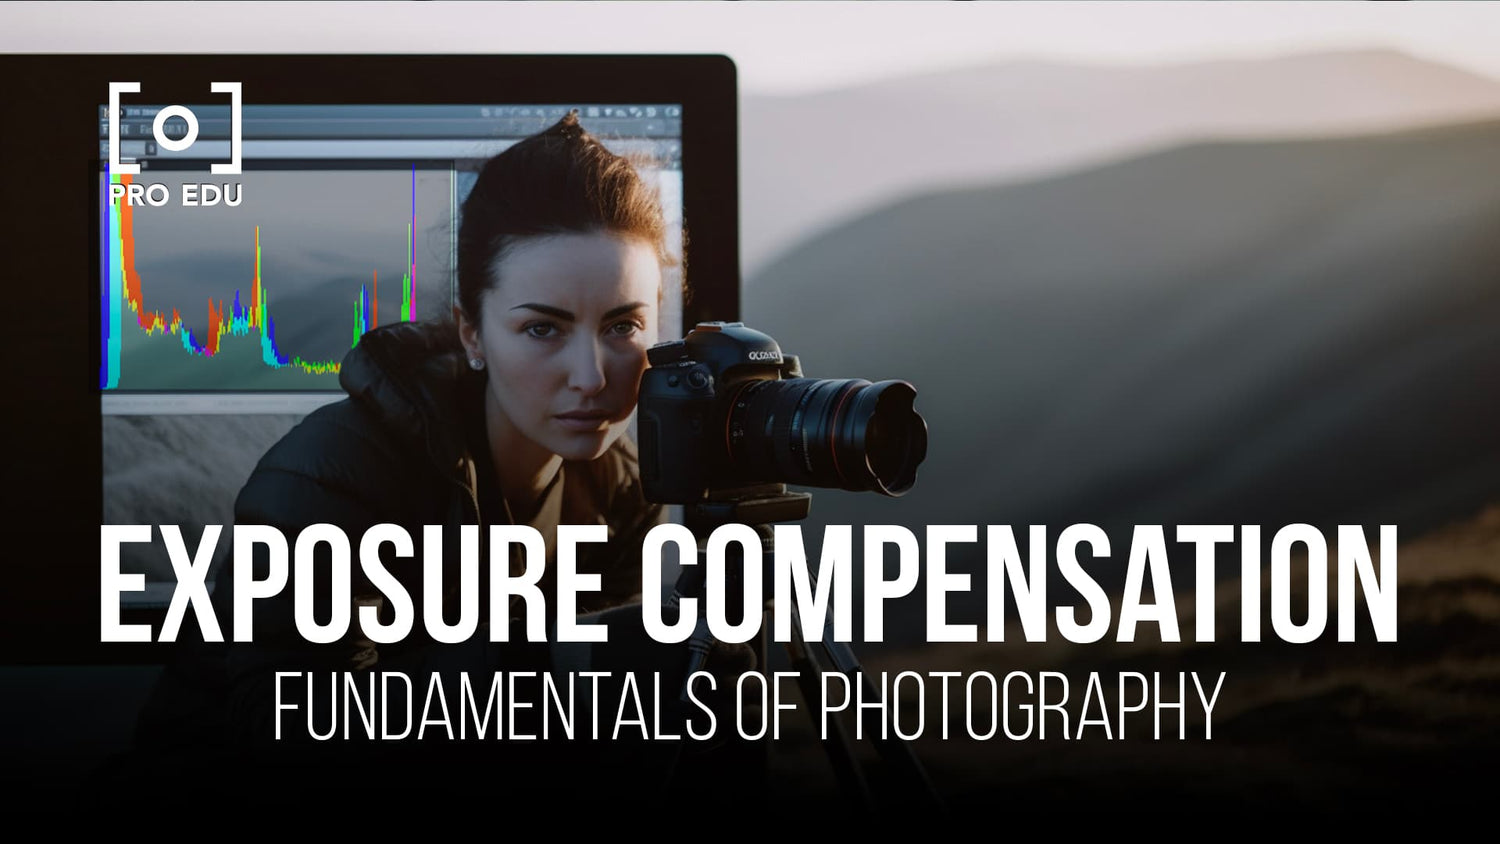 Perfecting your shots with exposure compensation techniques in photography